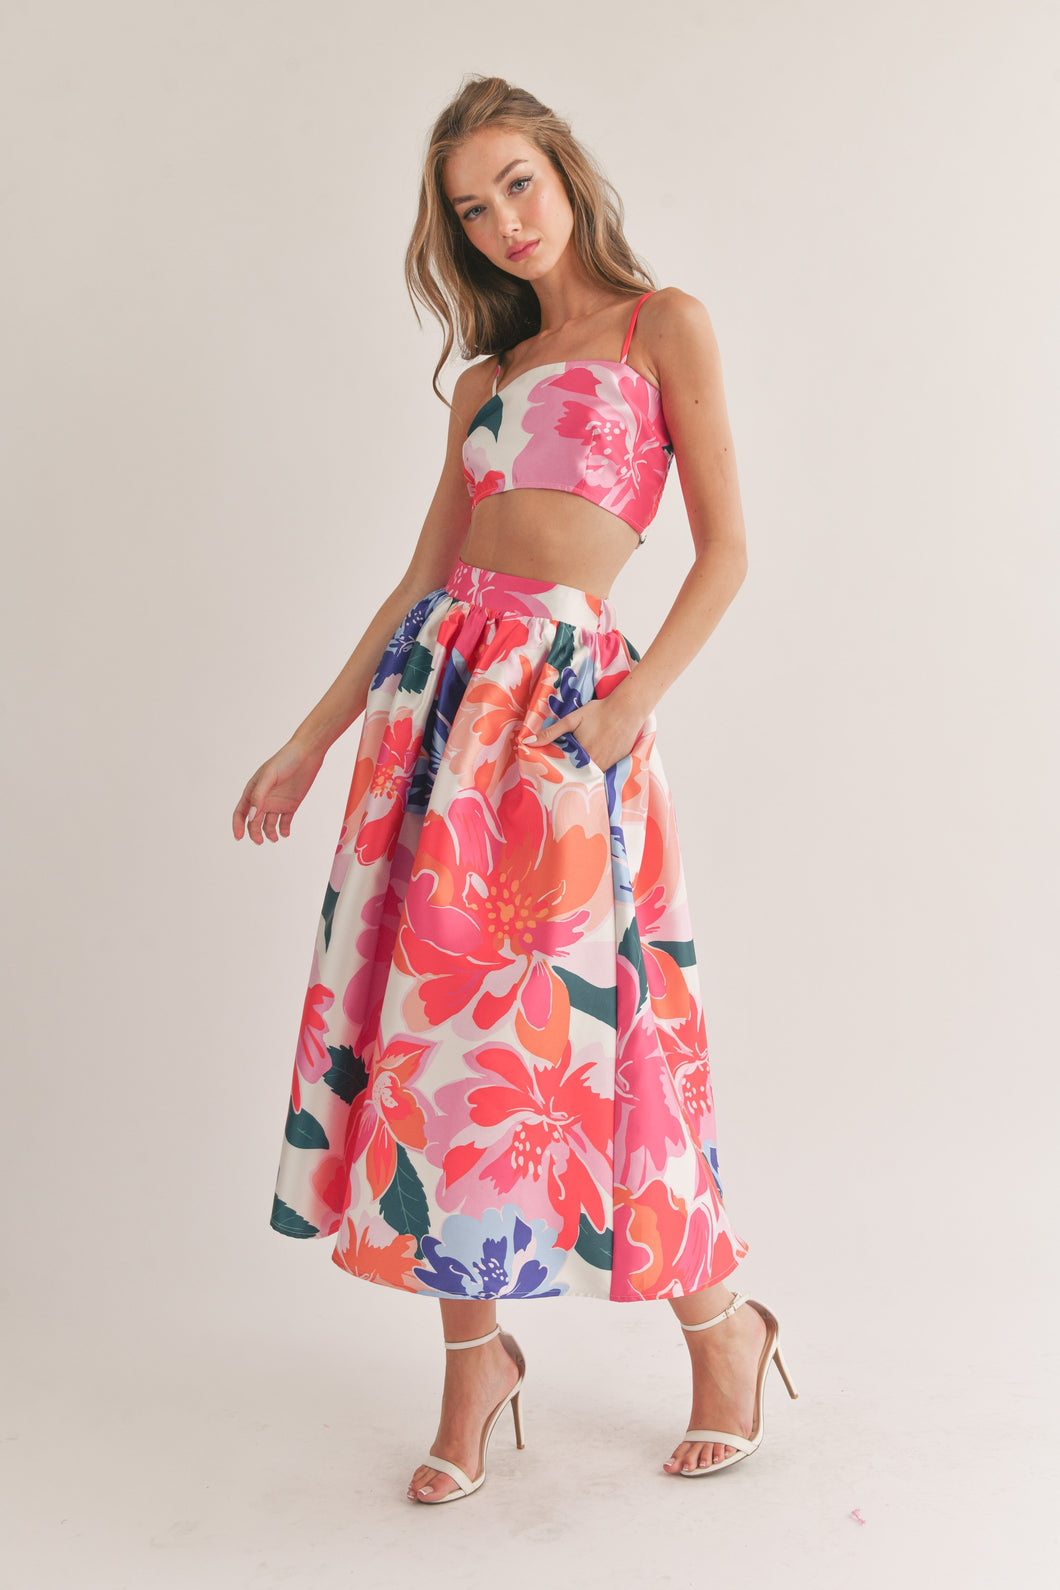 Floral Two Piece Skirt Set